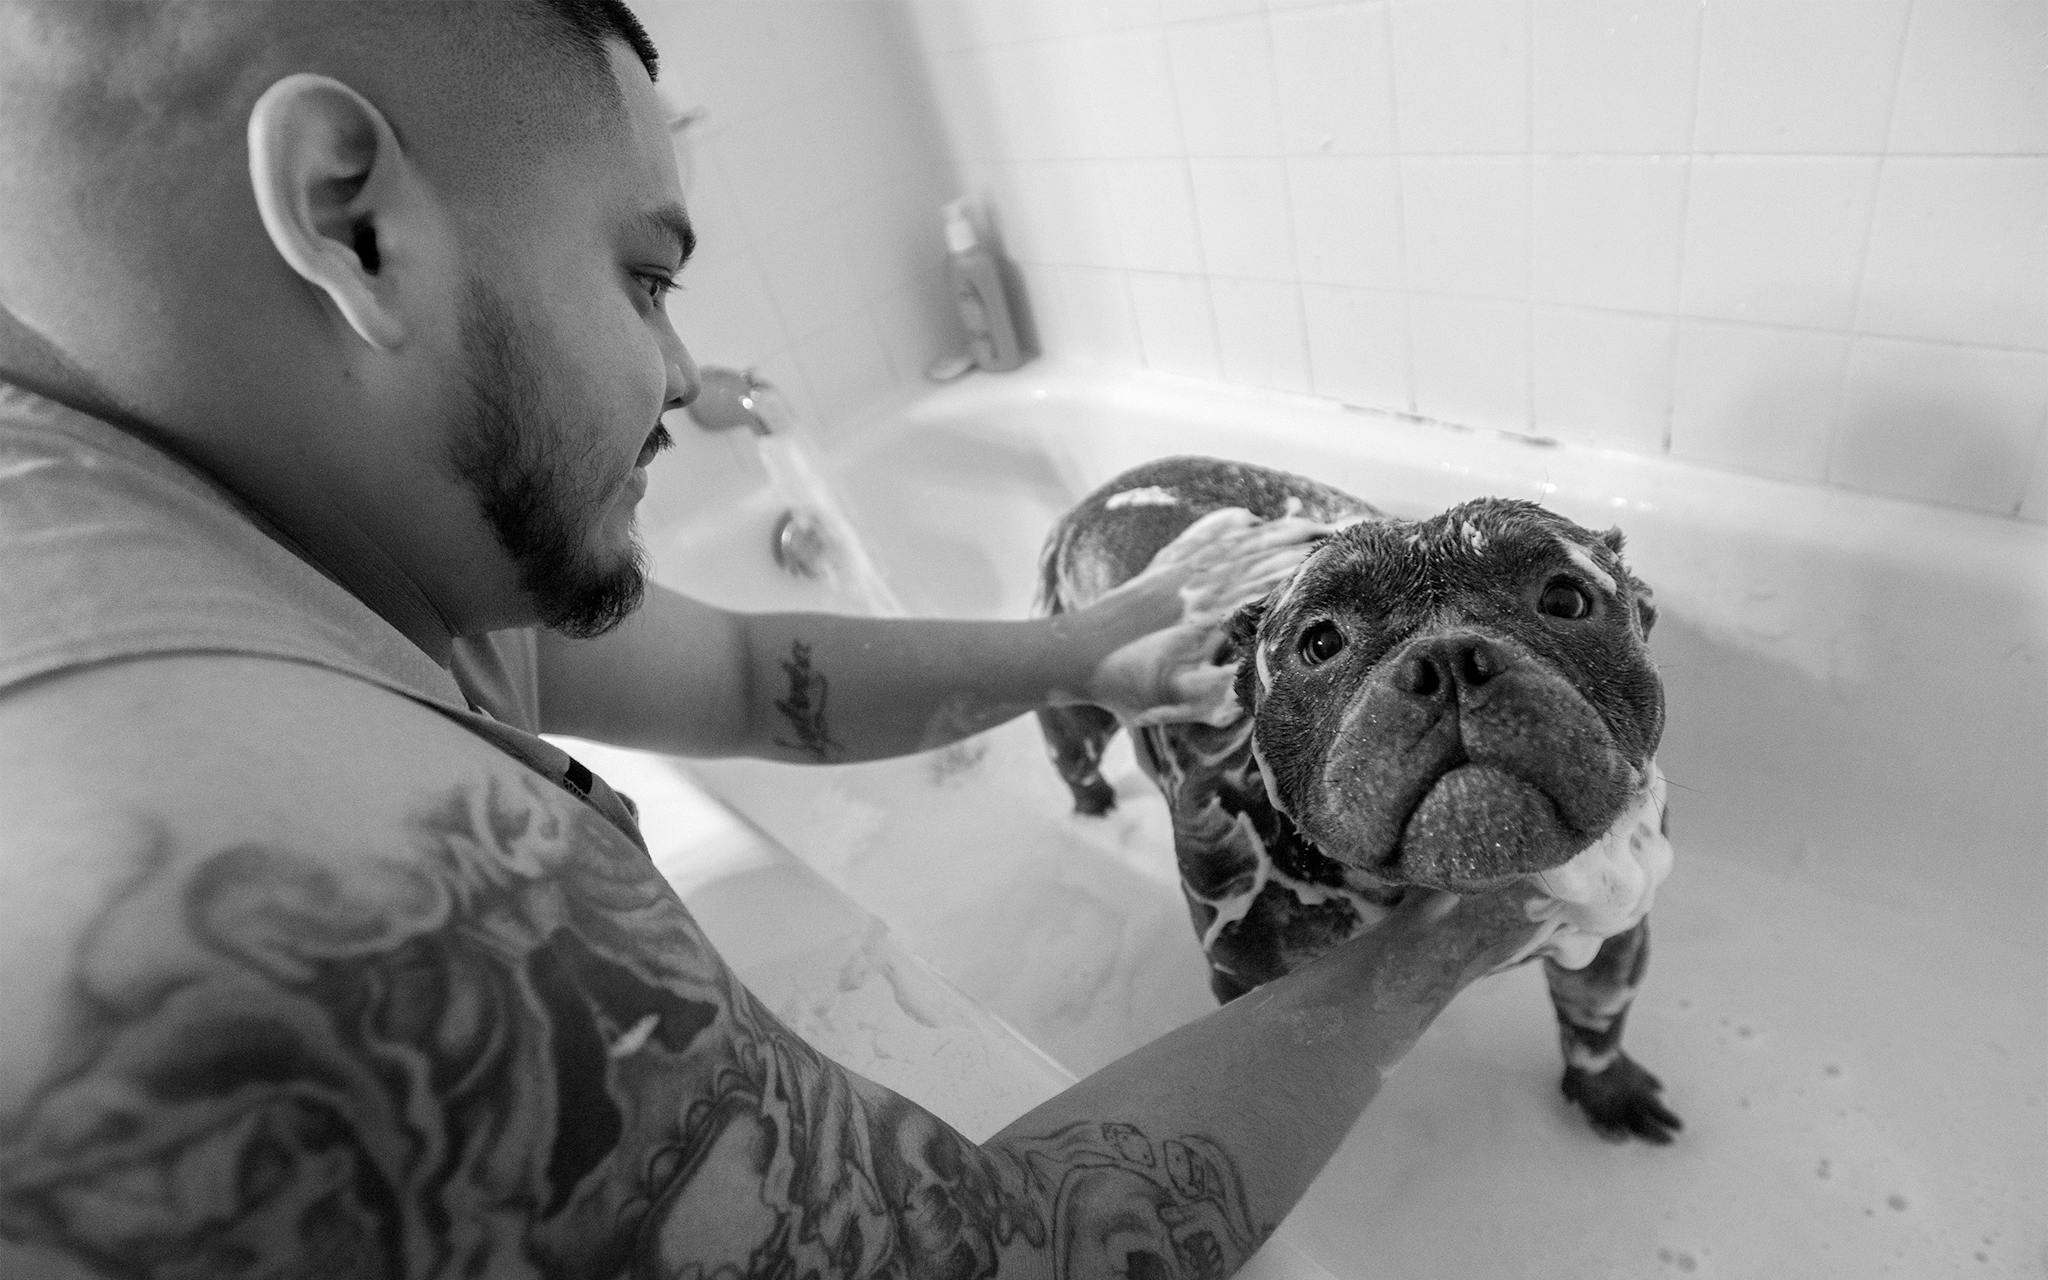 Josh Fabela, 26, bathes Sissy, one of the exotic pitbulls he breeds as part of his business at his home in Southeast Austin on February 8, 2020.